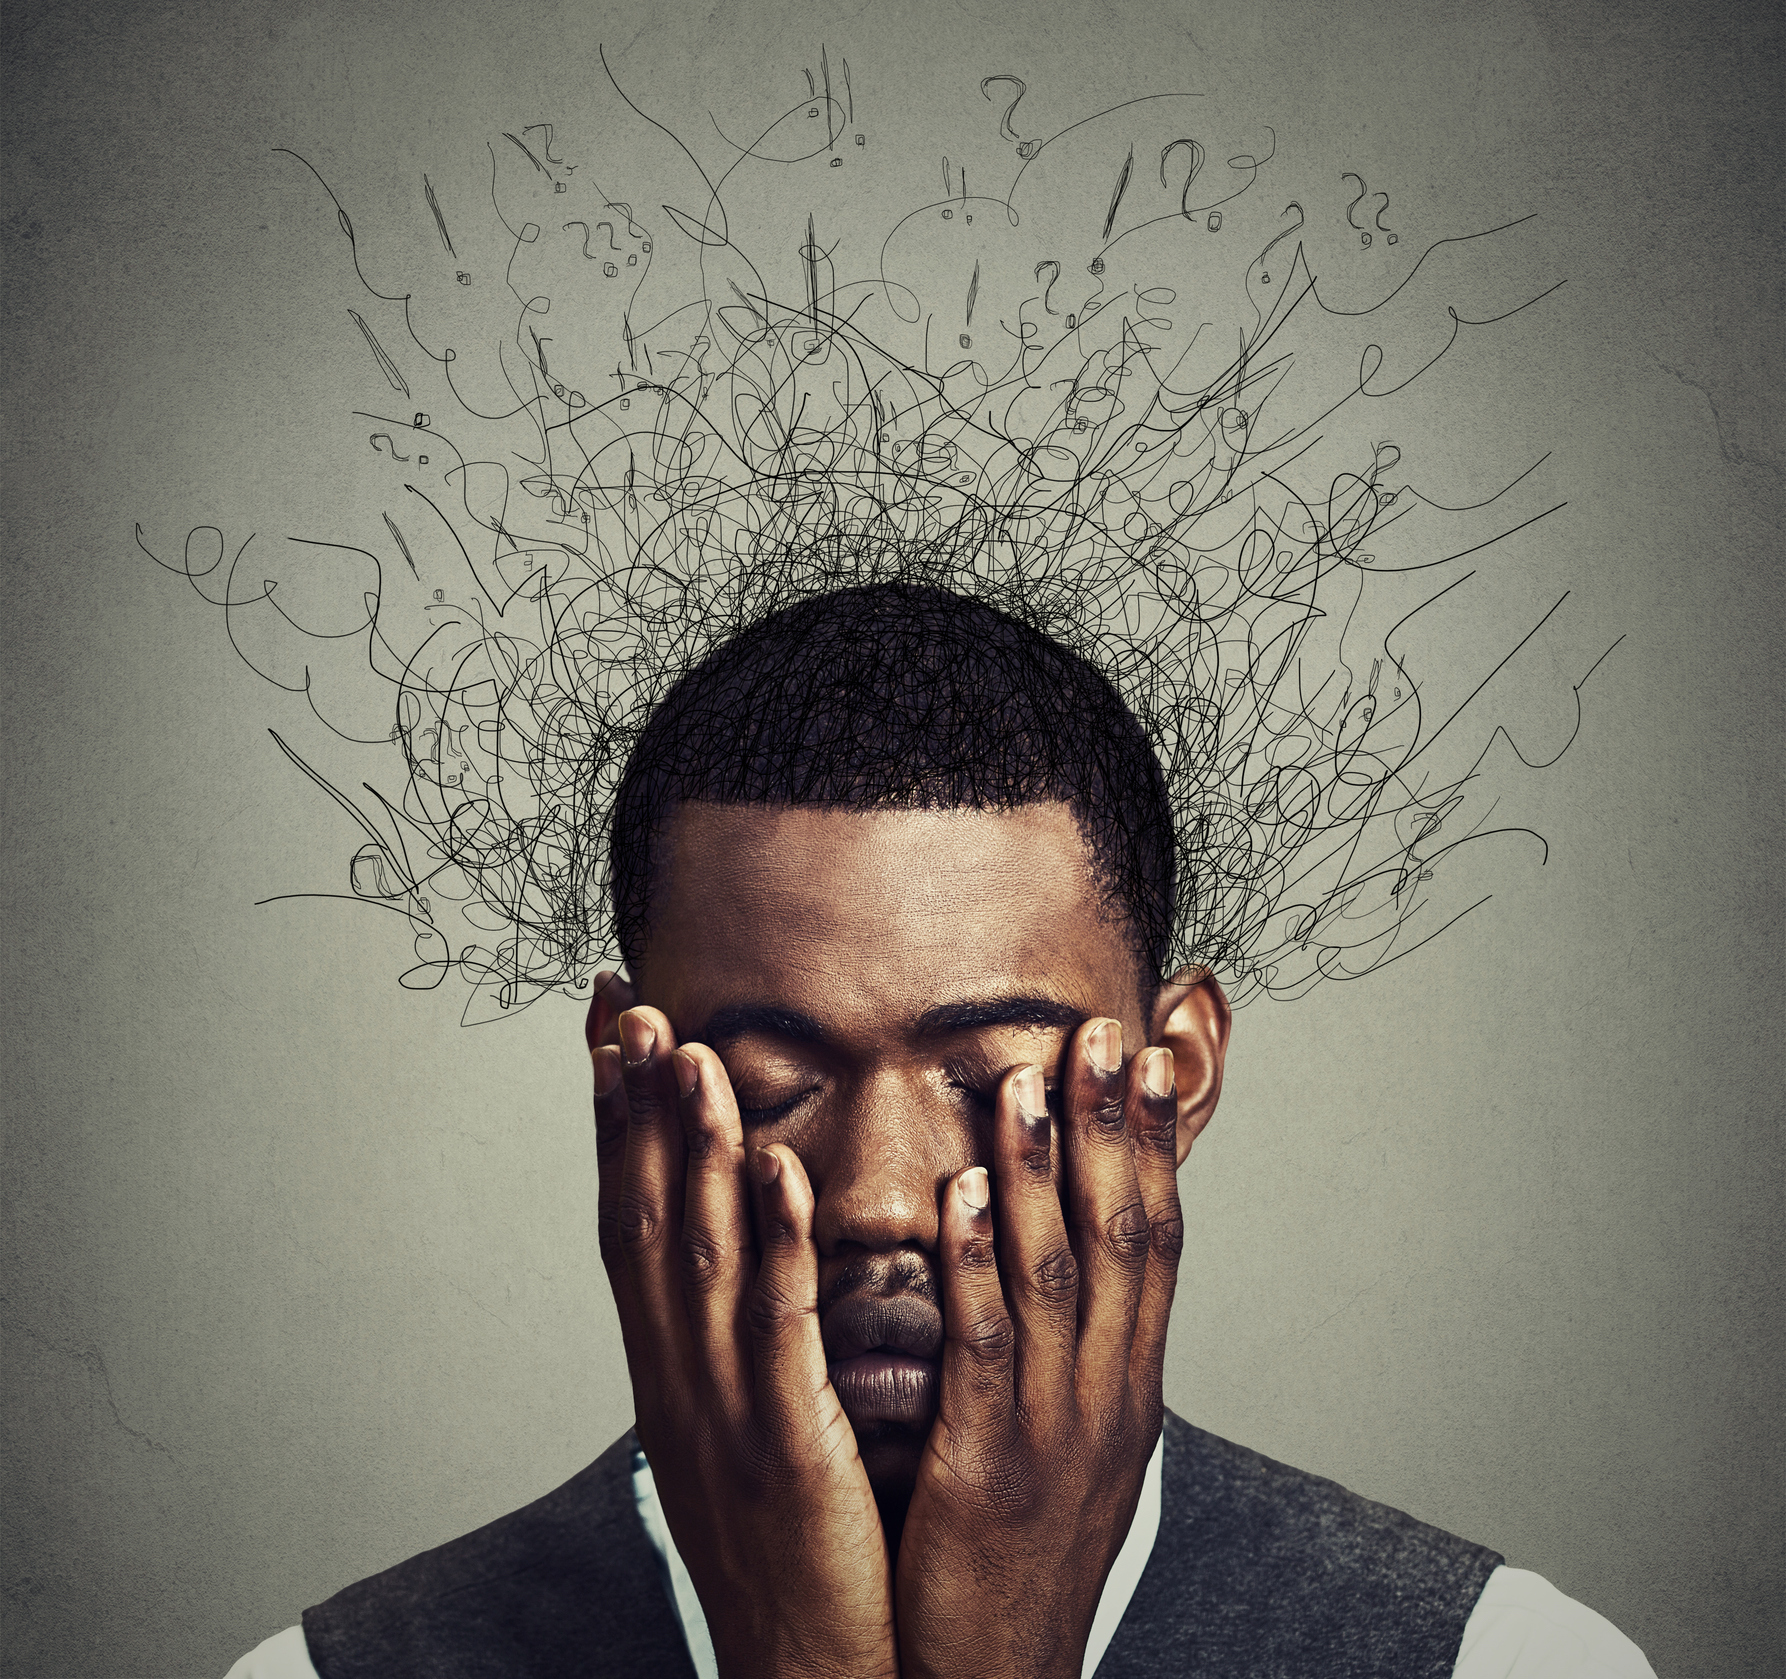 Depressed worried young man with worried desperate stressed expression hands covering face and brain melting into lines question marks. Depression, anxiety disorders, life failure. Gray background 1786 x 1679